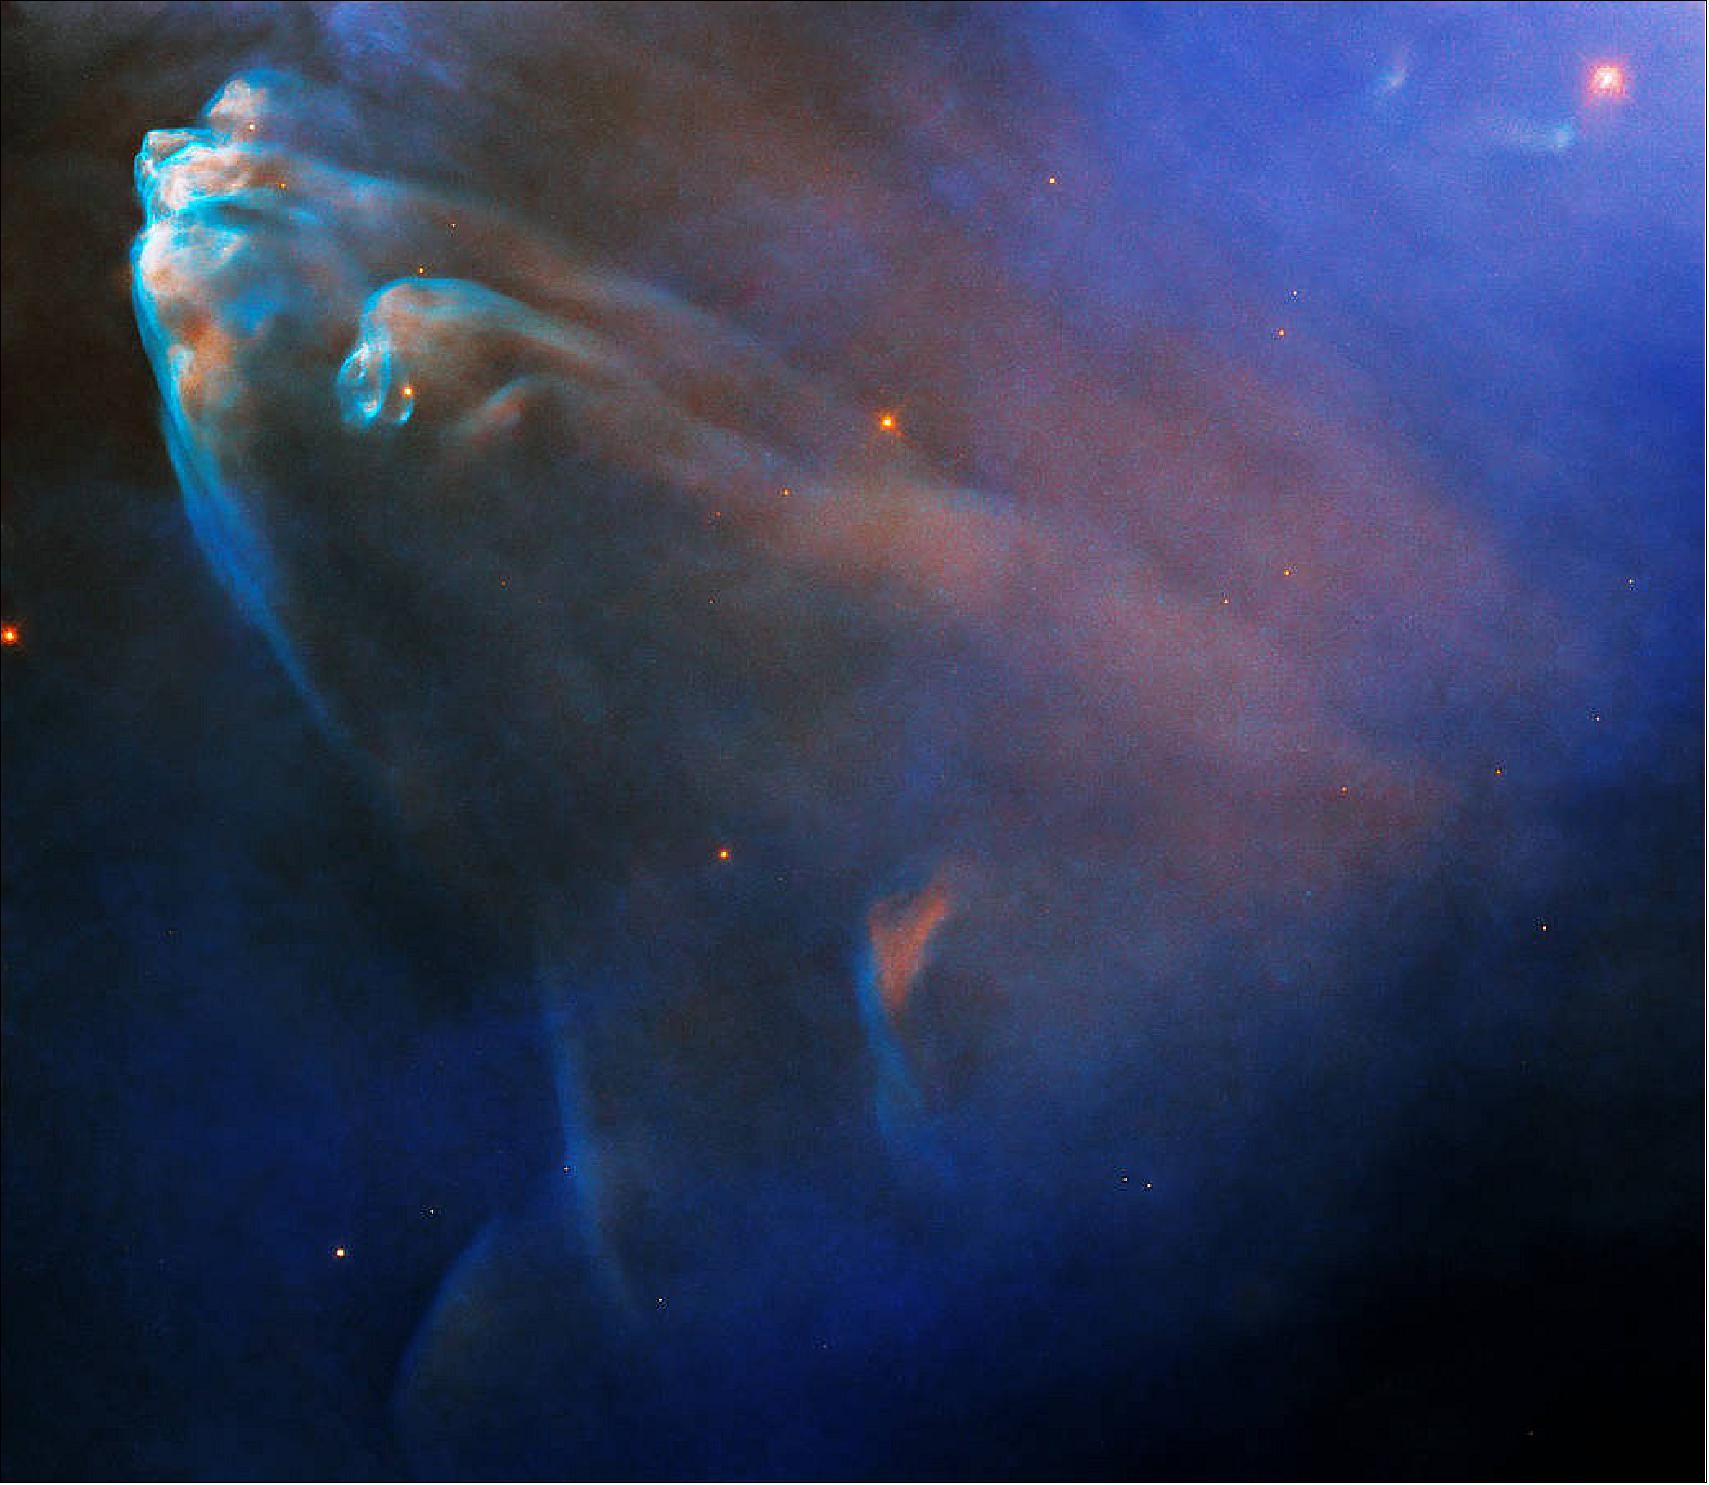 Figure 9: This object is located in the nebula NGC 1977, which itself is part of a complex of three nebulae called The Running Man. NGC 1977 – like its companions NGC 1975 and NGC 1973 – is a reflection nebula, which means that it doesn’t emit light on its own, but reflects light from nearby stars, like a streetlight illuminating fog. Hubble observed this region to look for stellar jets and planet-forming disks around young stars, and examine how their environment affects the evolution of such disks [image credit: NASA, ESA, and J. Bally (University of Colorado at Boulder); Processing: Gladys Kober (NASA/Catholic University of America)]